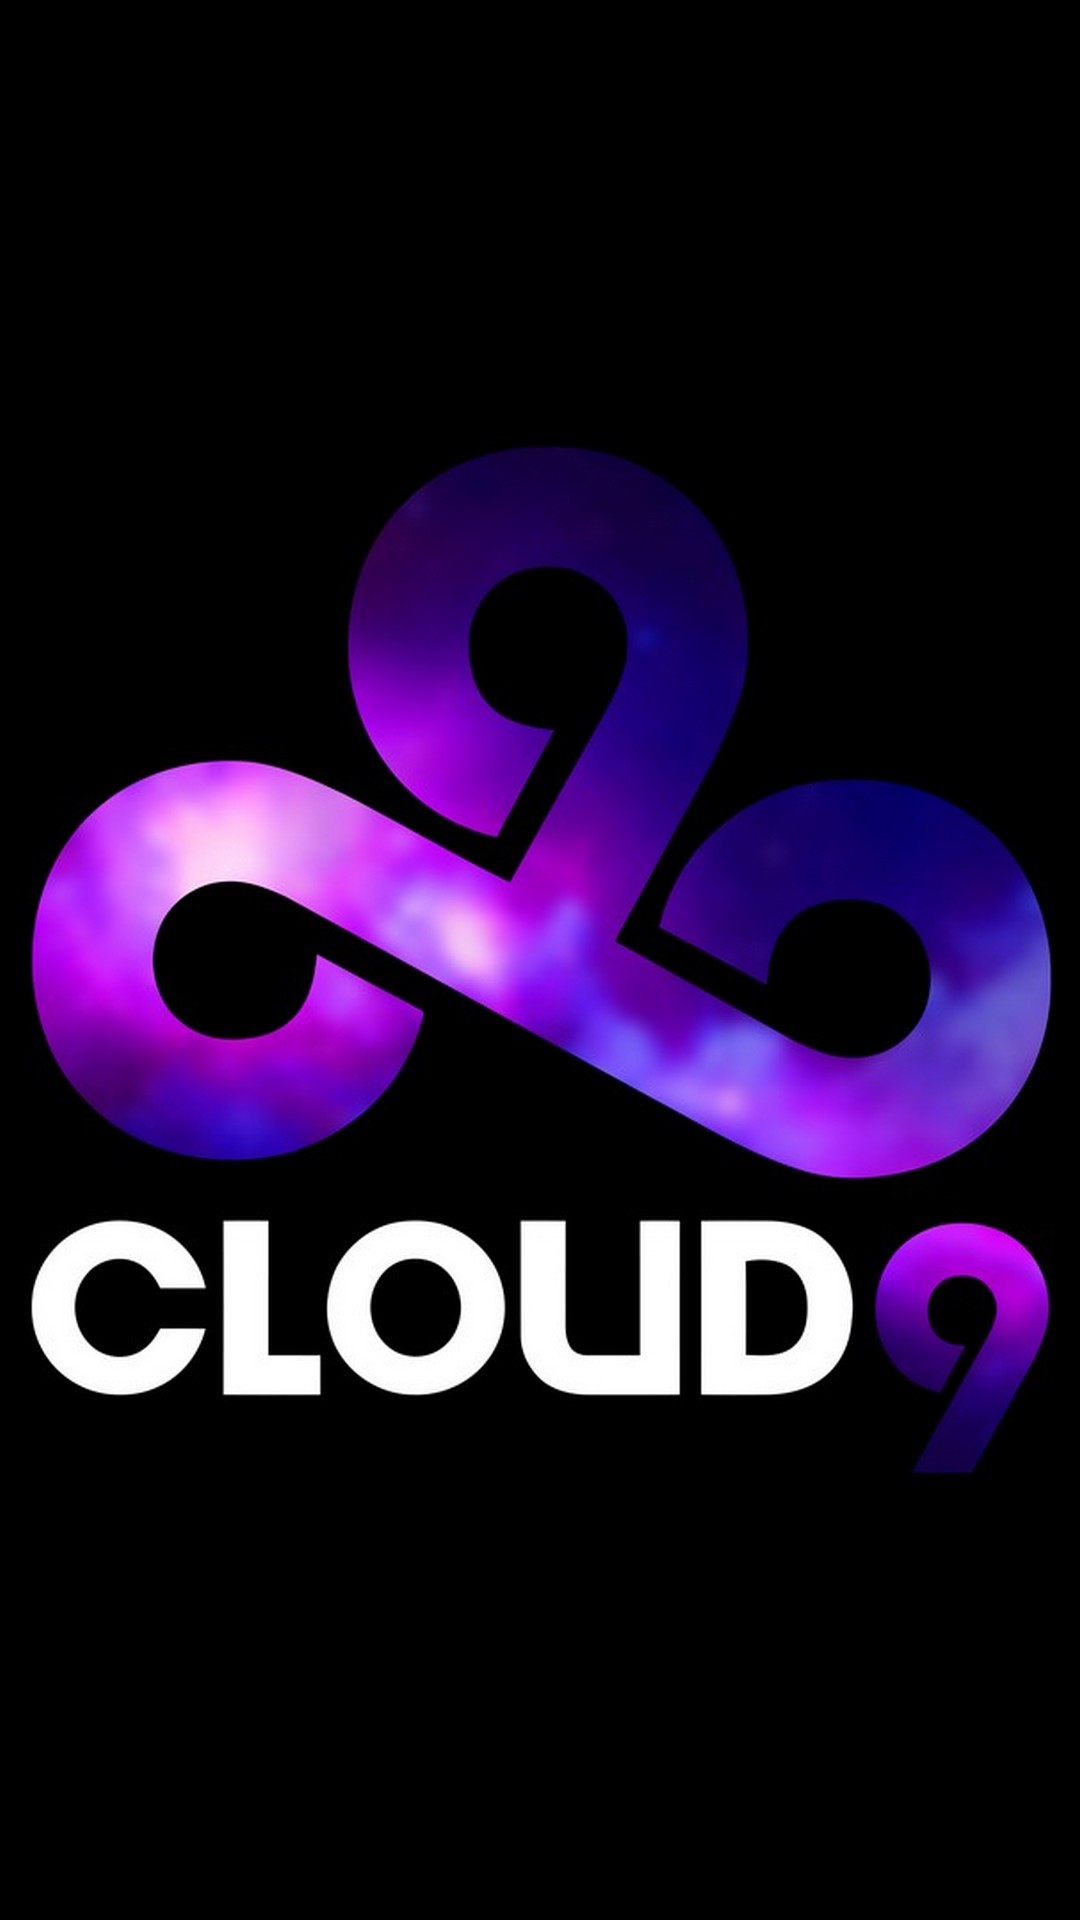 Cloud 9 Wallpaper For Android with HD resolution 1080x1920